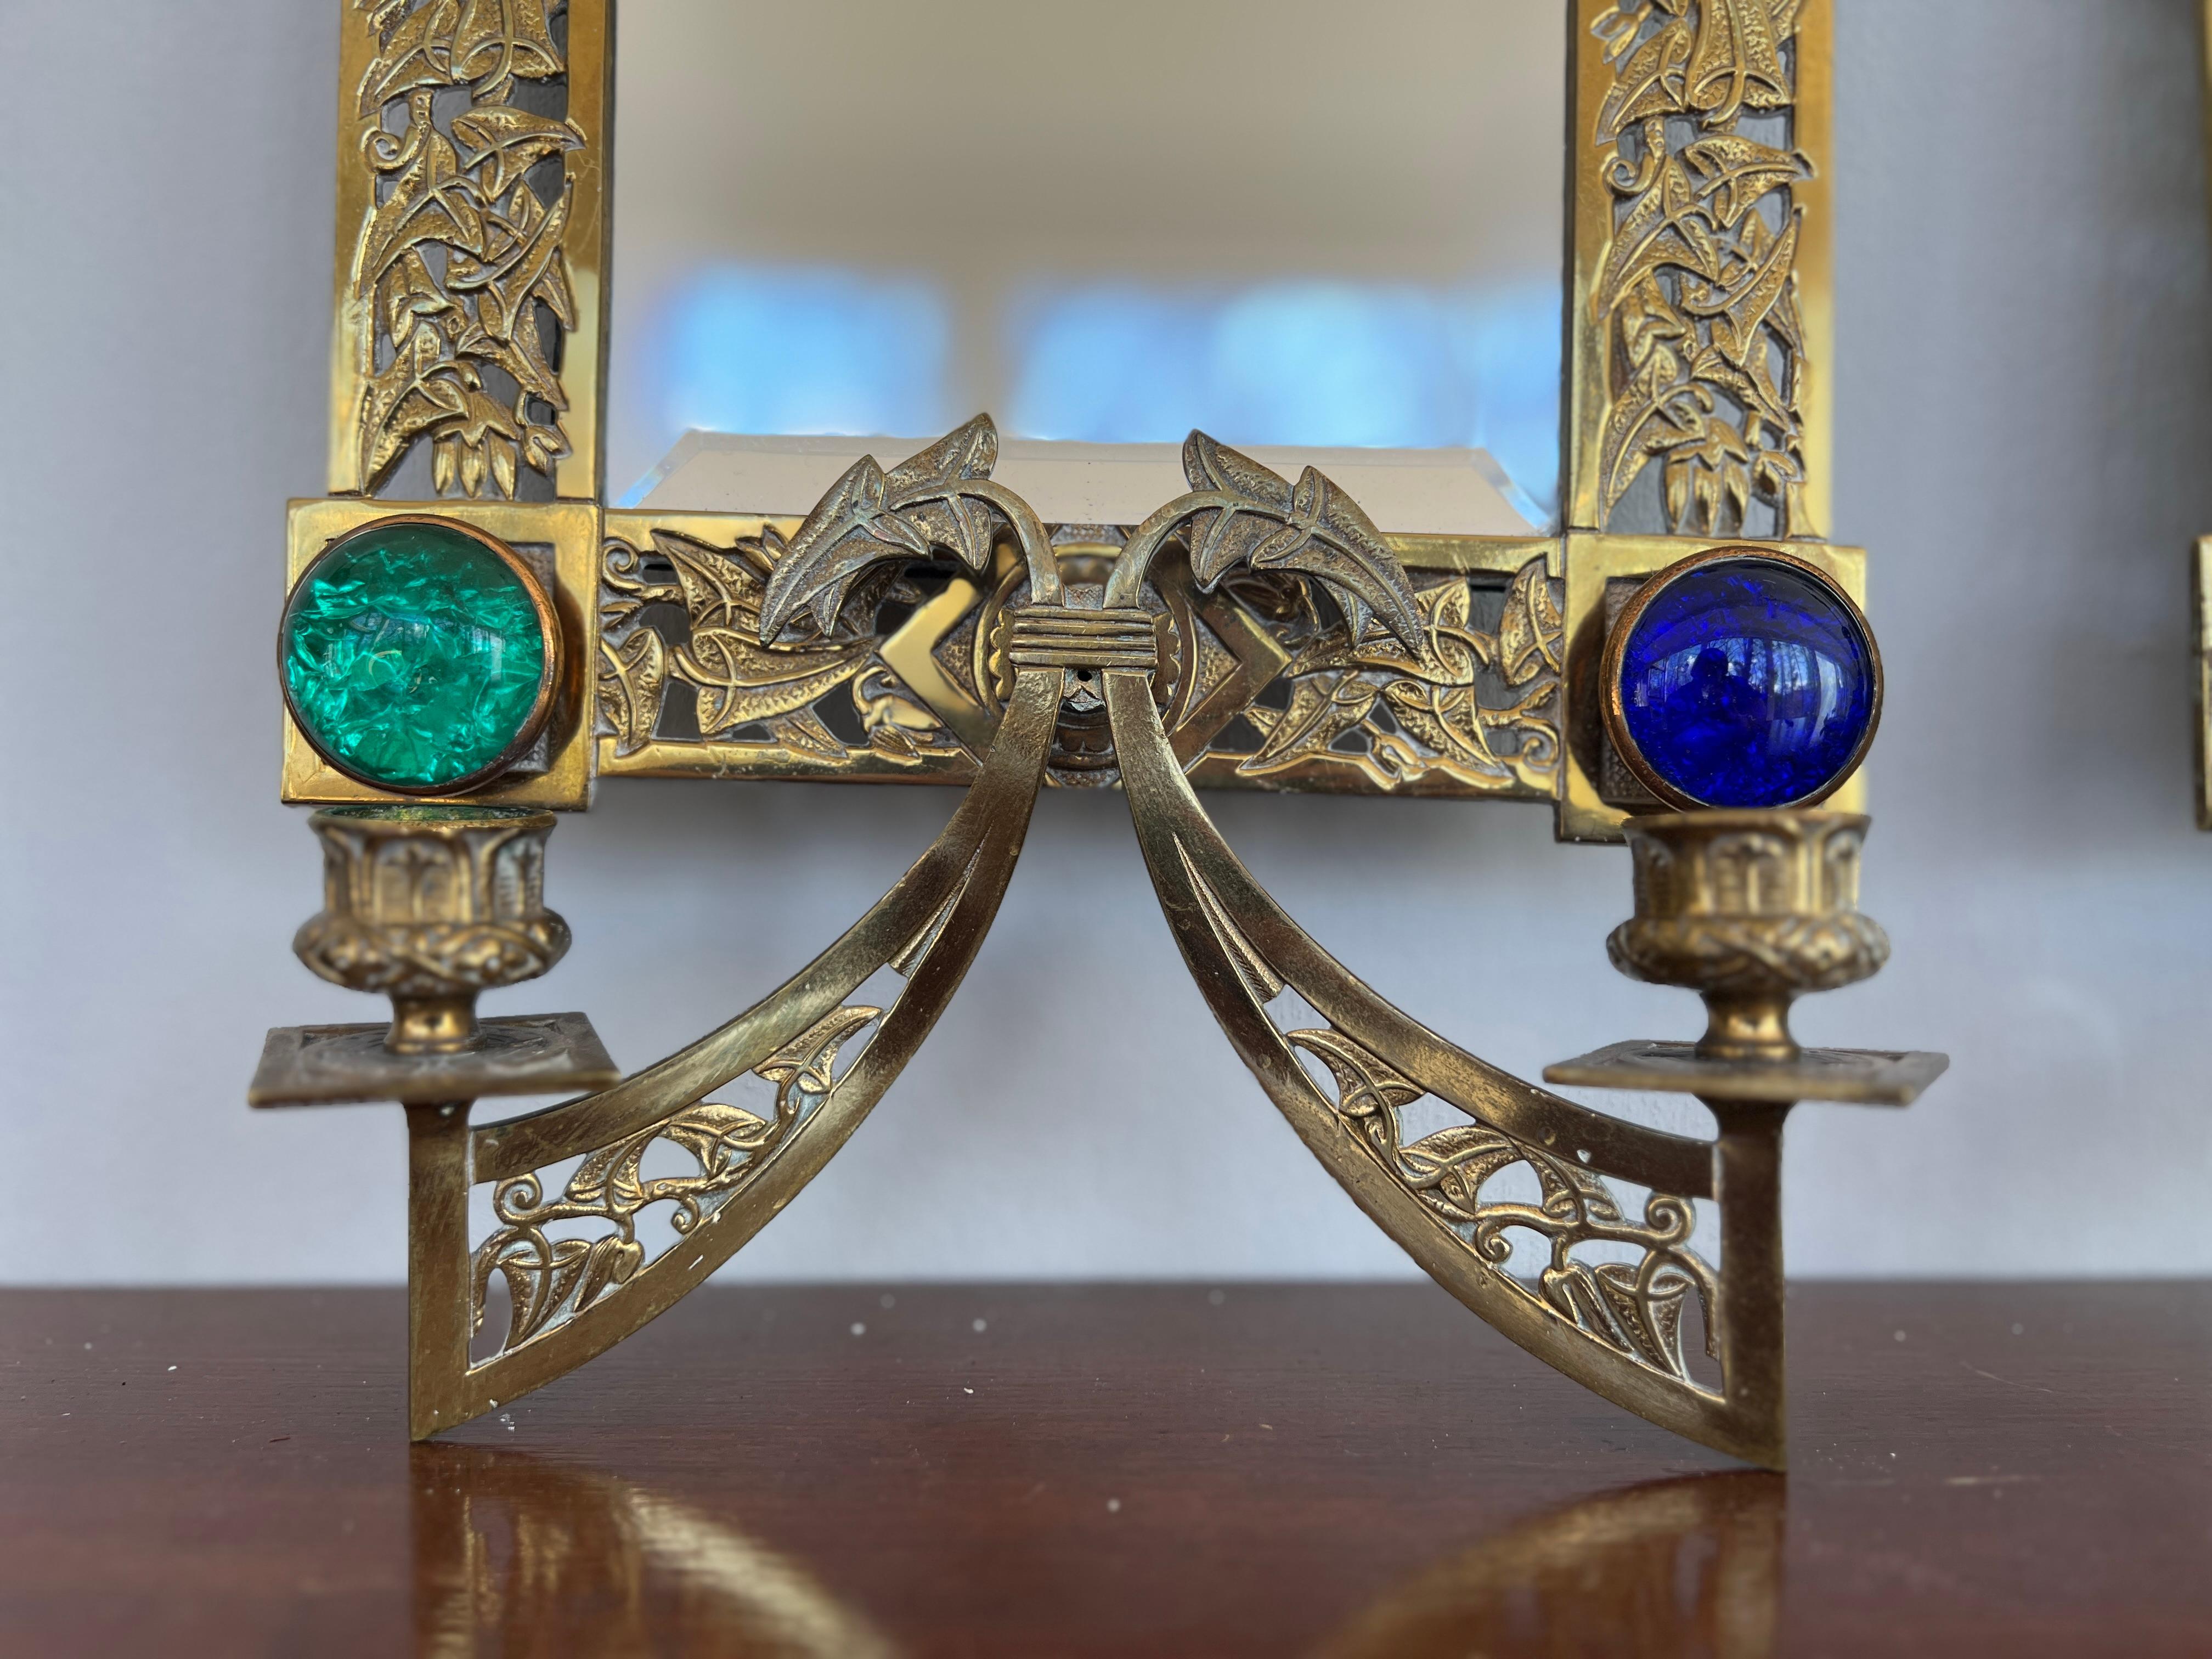 Likely English, circa 1890.

A pair of heavy and good quality bronze 2-light wall sconces. Each with a pierced surface showing arrays of floral, foliate and inset with 4 beautiful jeweled cabochons to each mirror. They both feature two-light dropped